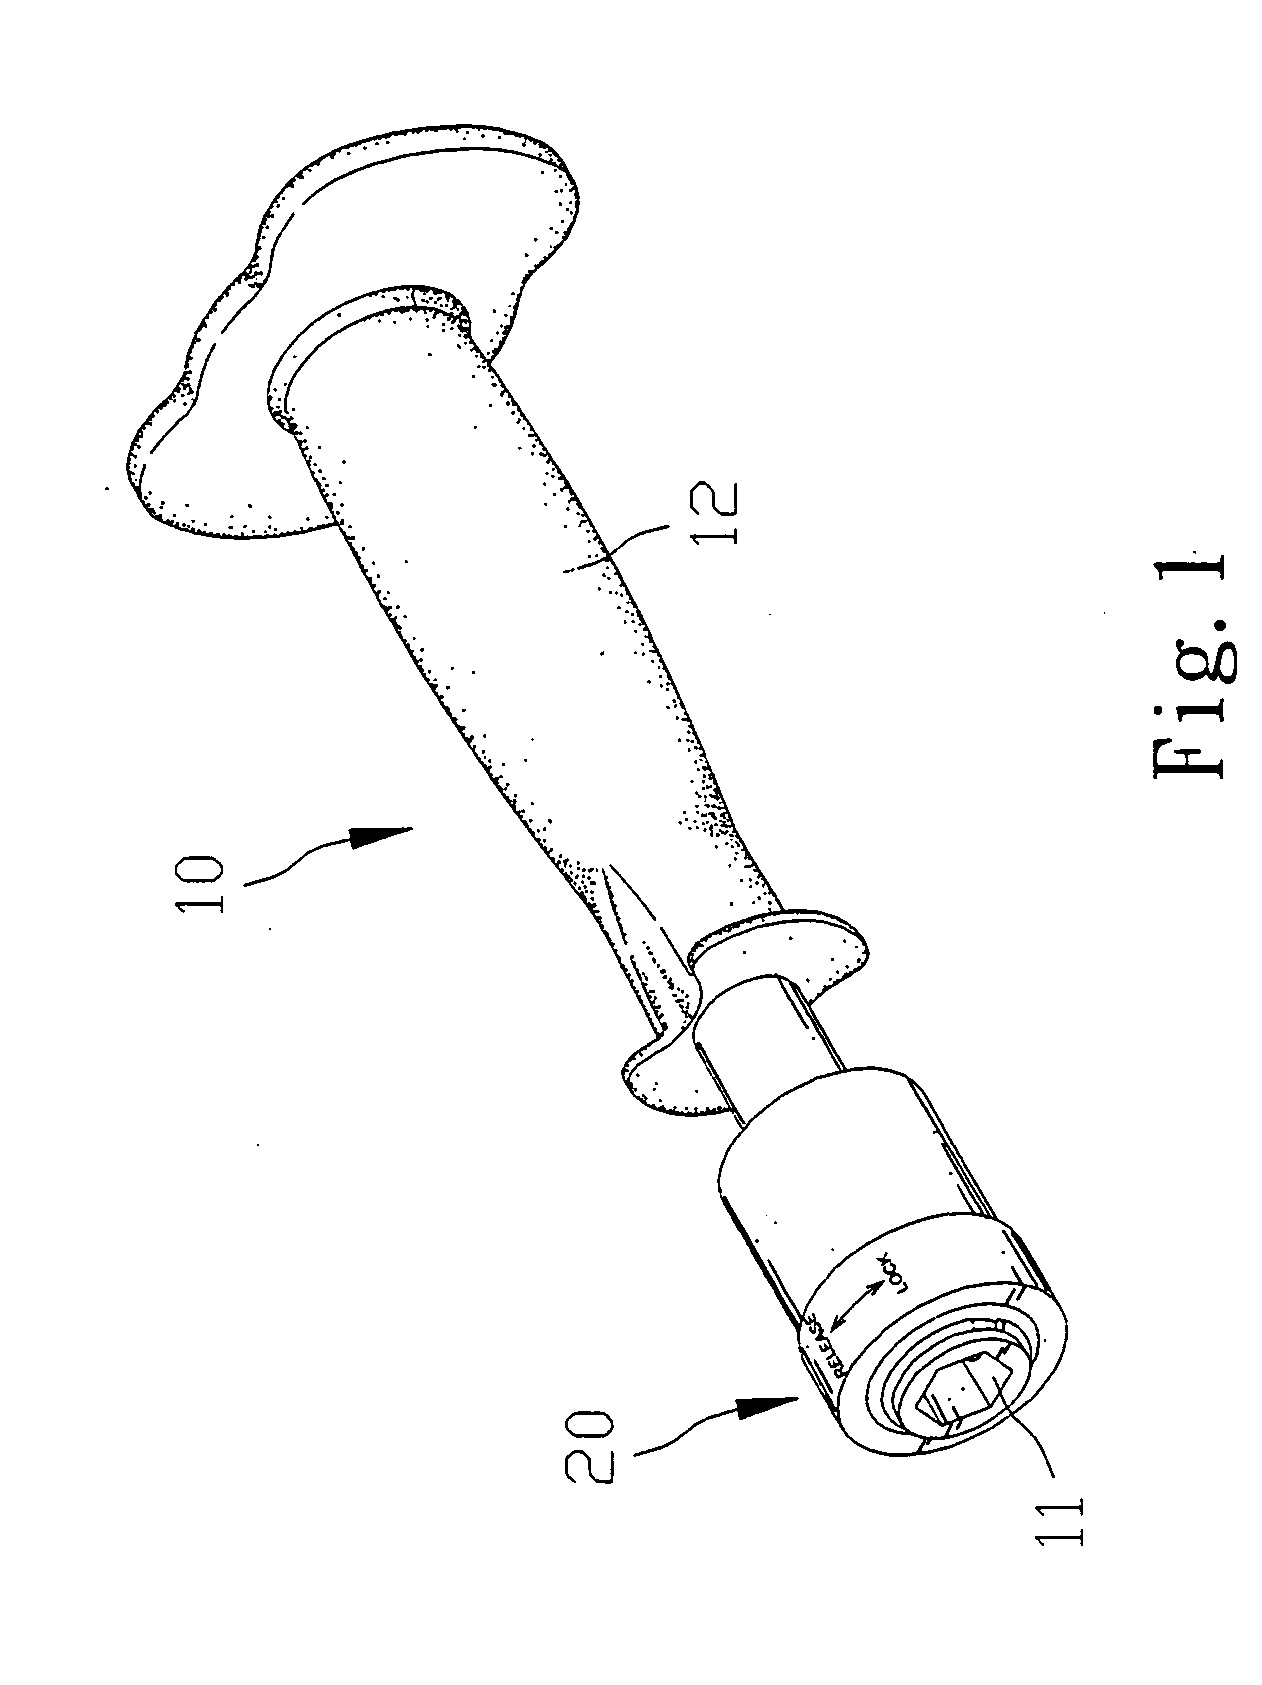 Tool including bit and handle